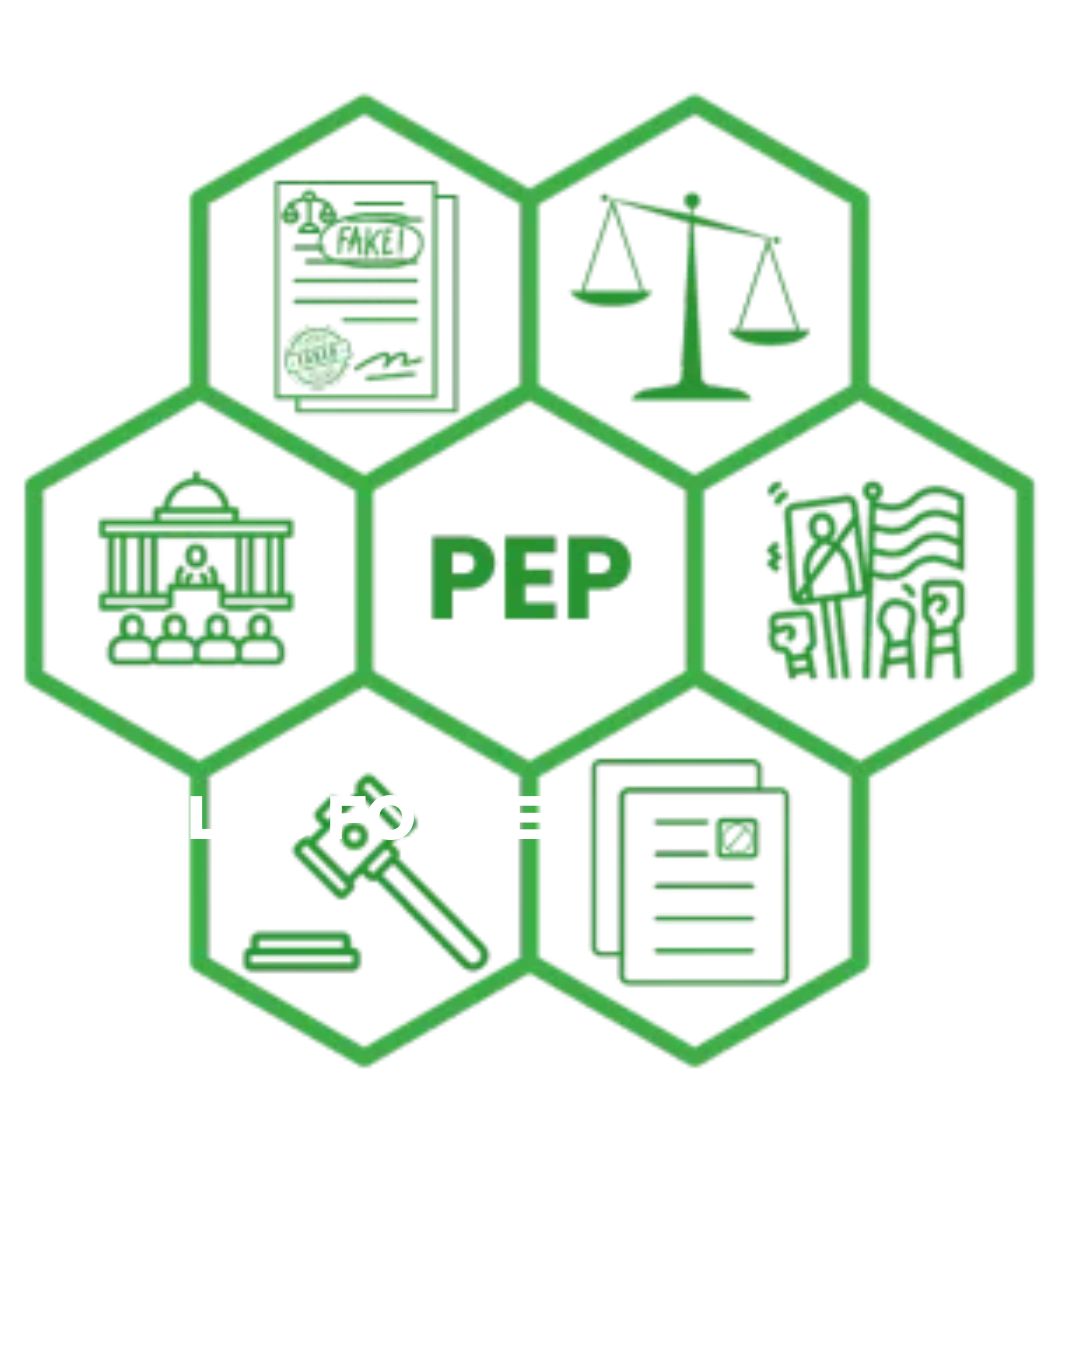 Why is it important to have access to a PEP List? - California - Bakersfield ID1532836